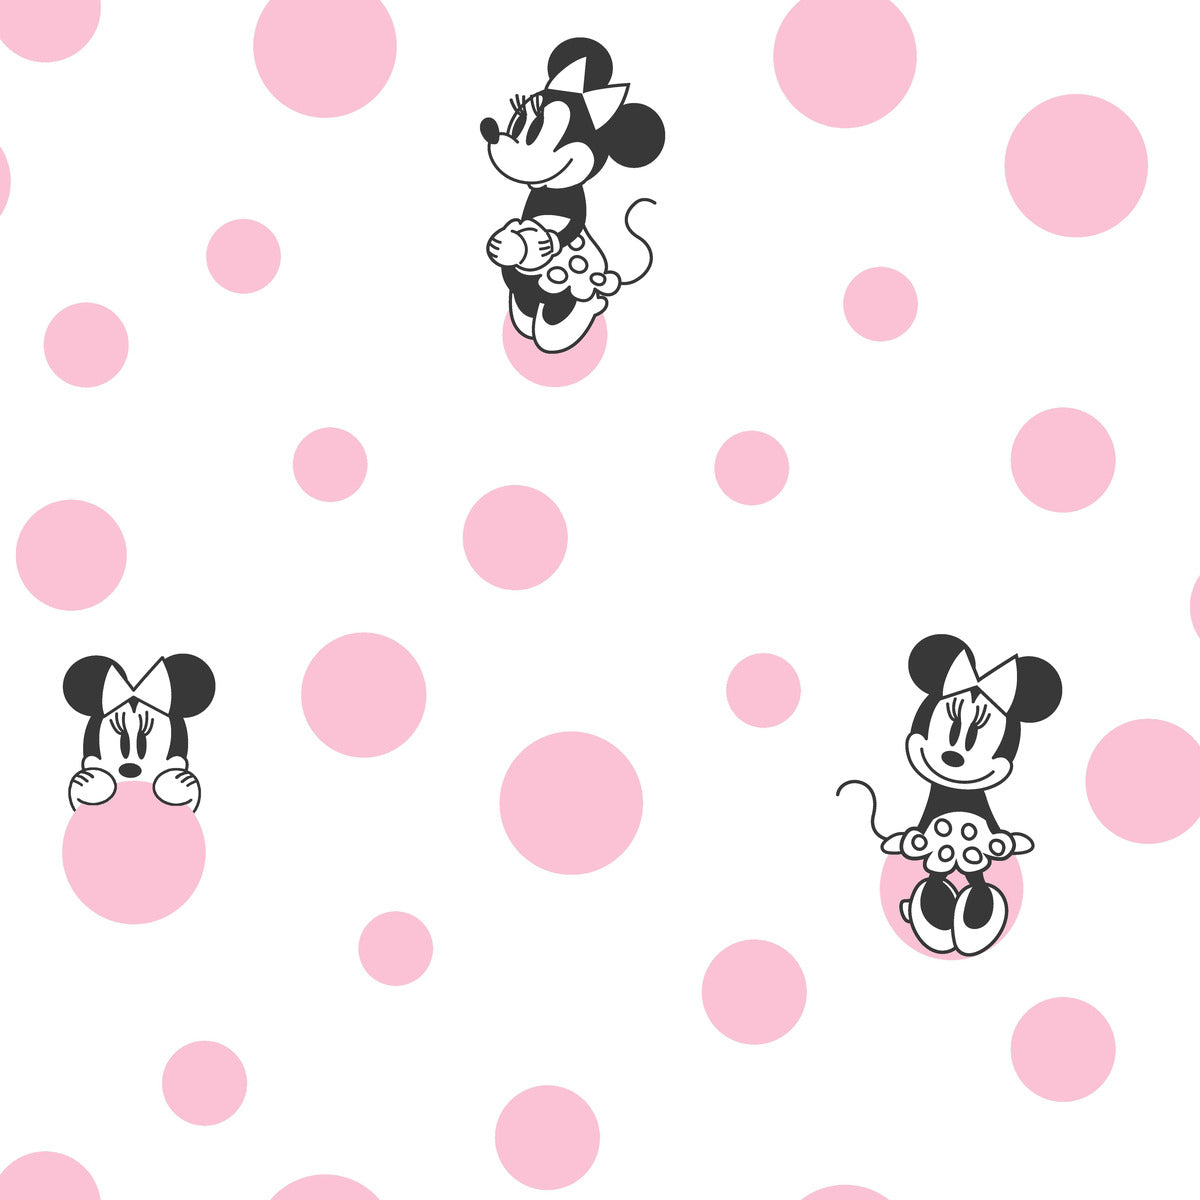 mickey mouse and minnie mouse wallpaper black and white